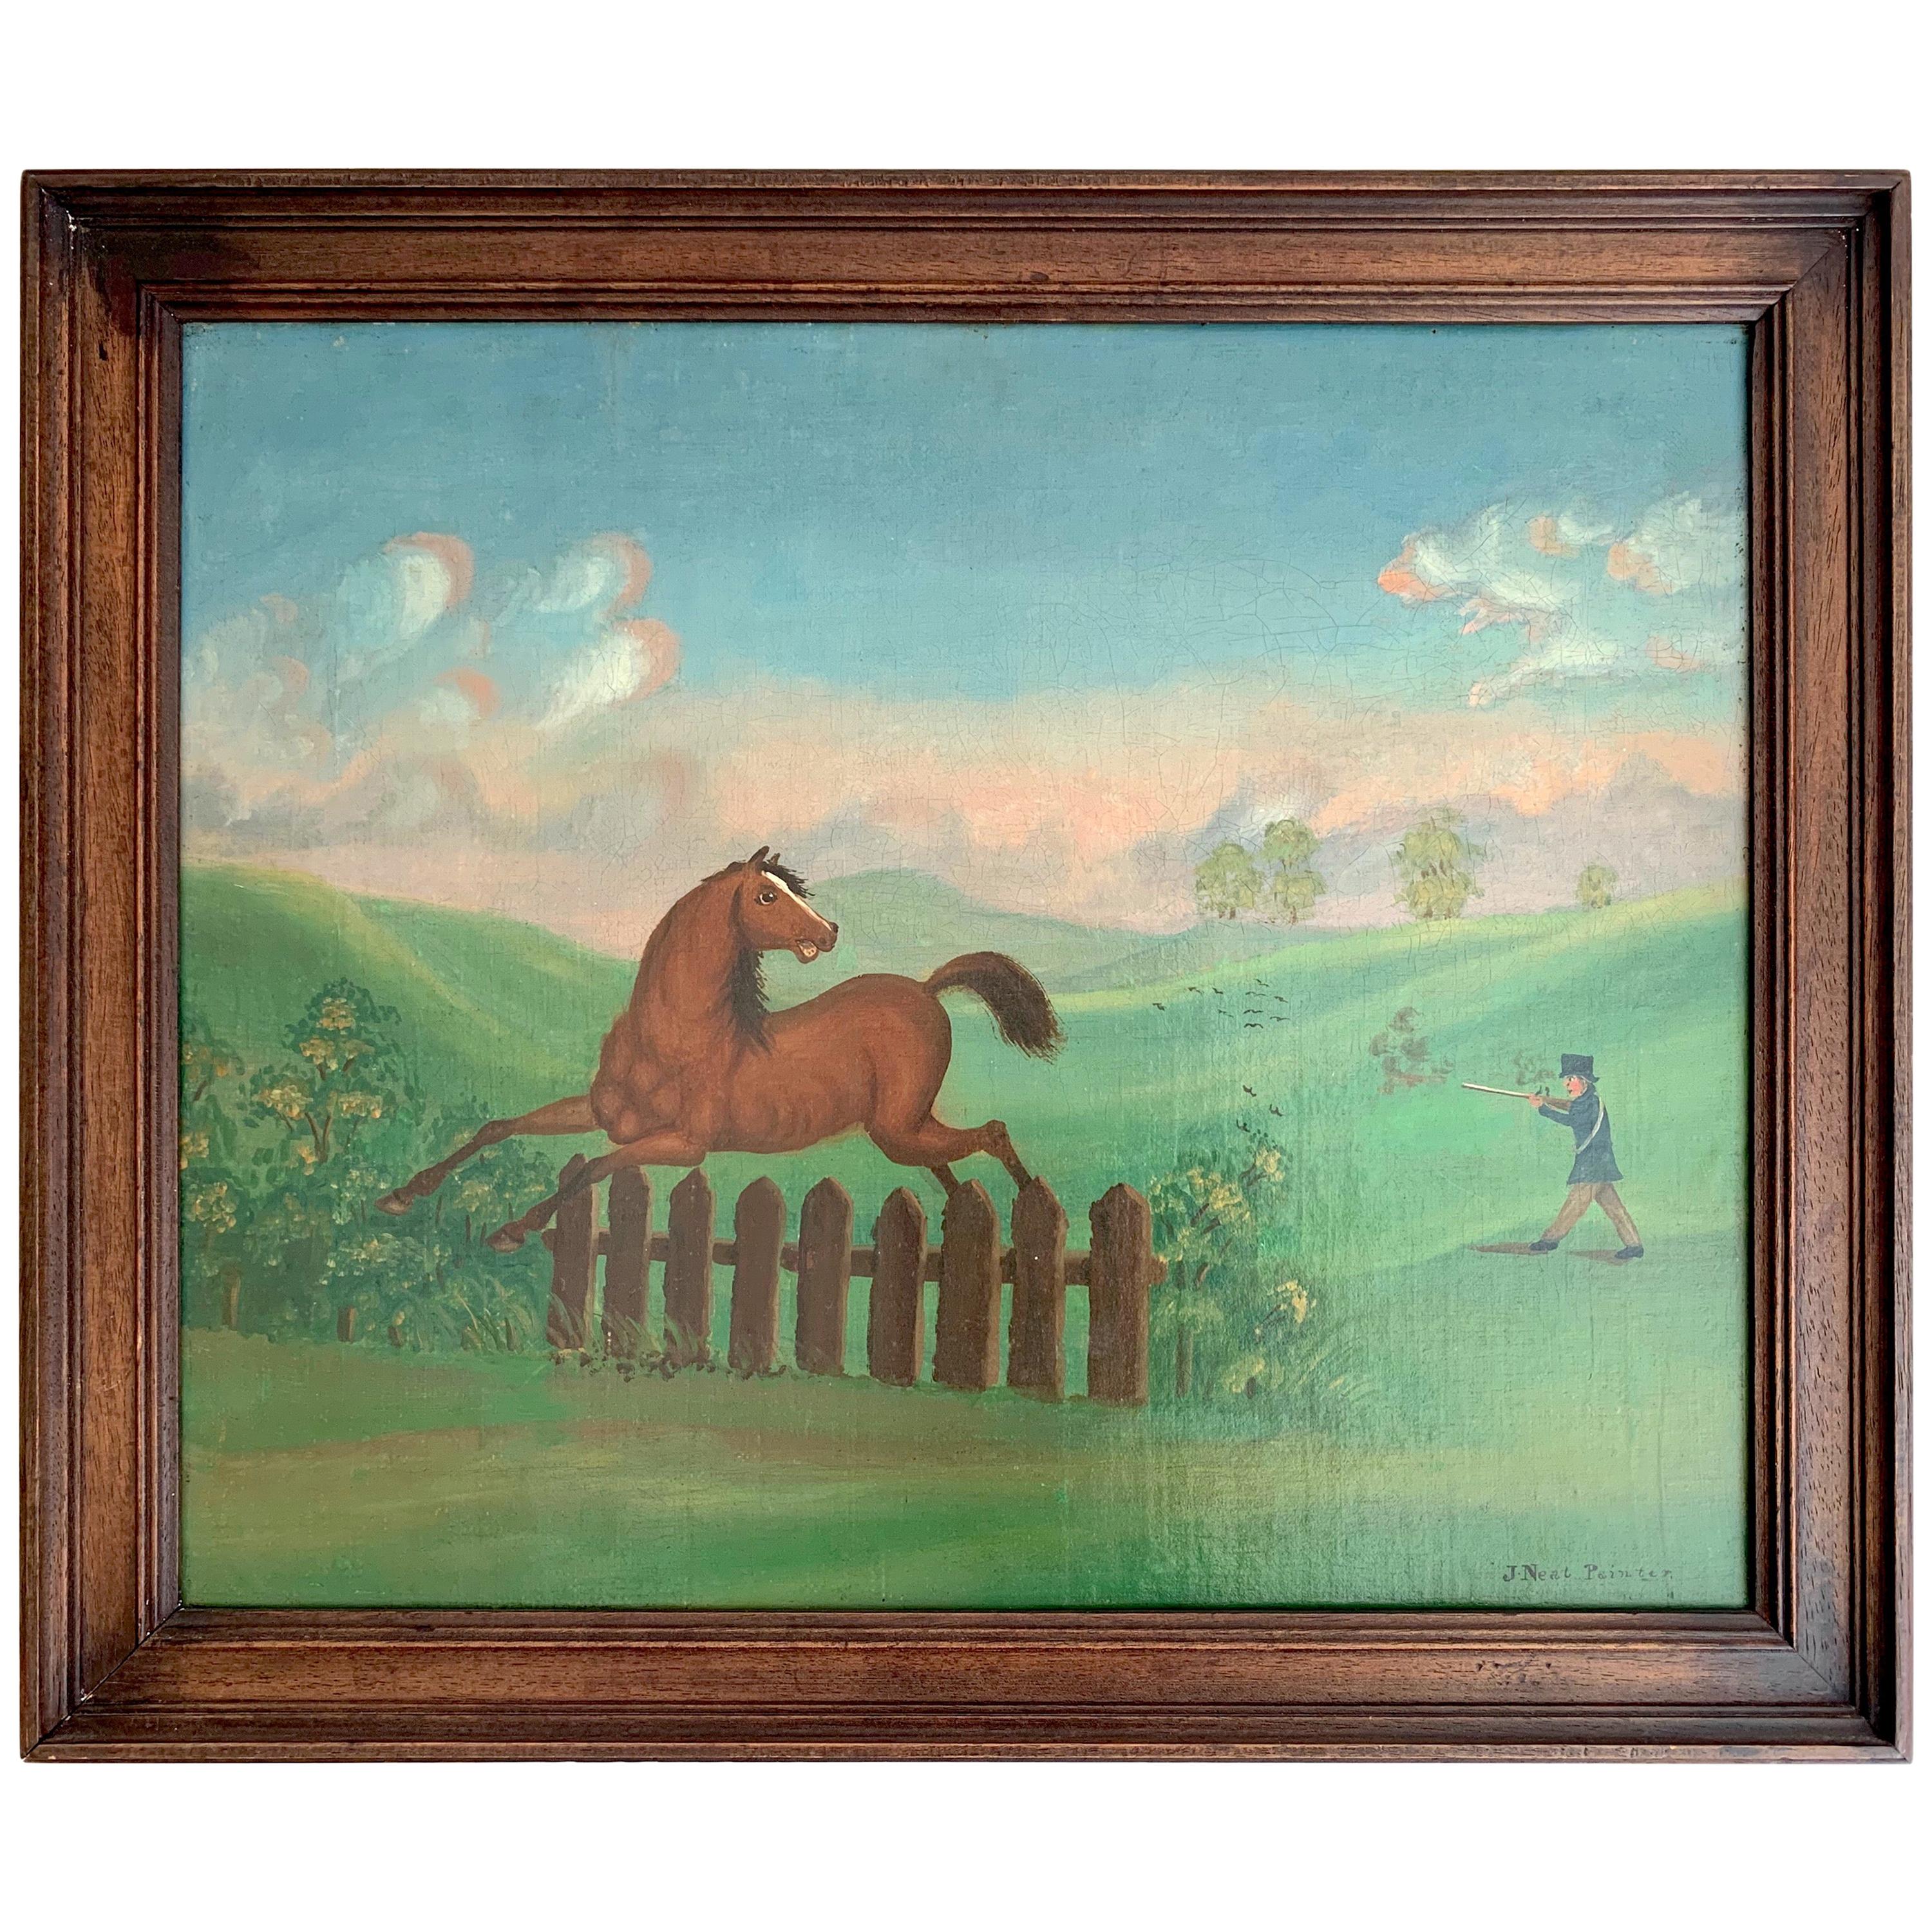 Antique 1900 Oil Painting of a Horse and a Hunter in Landscape Signed J.Neat